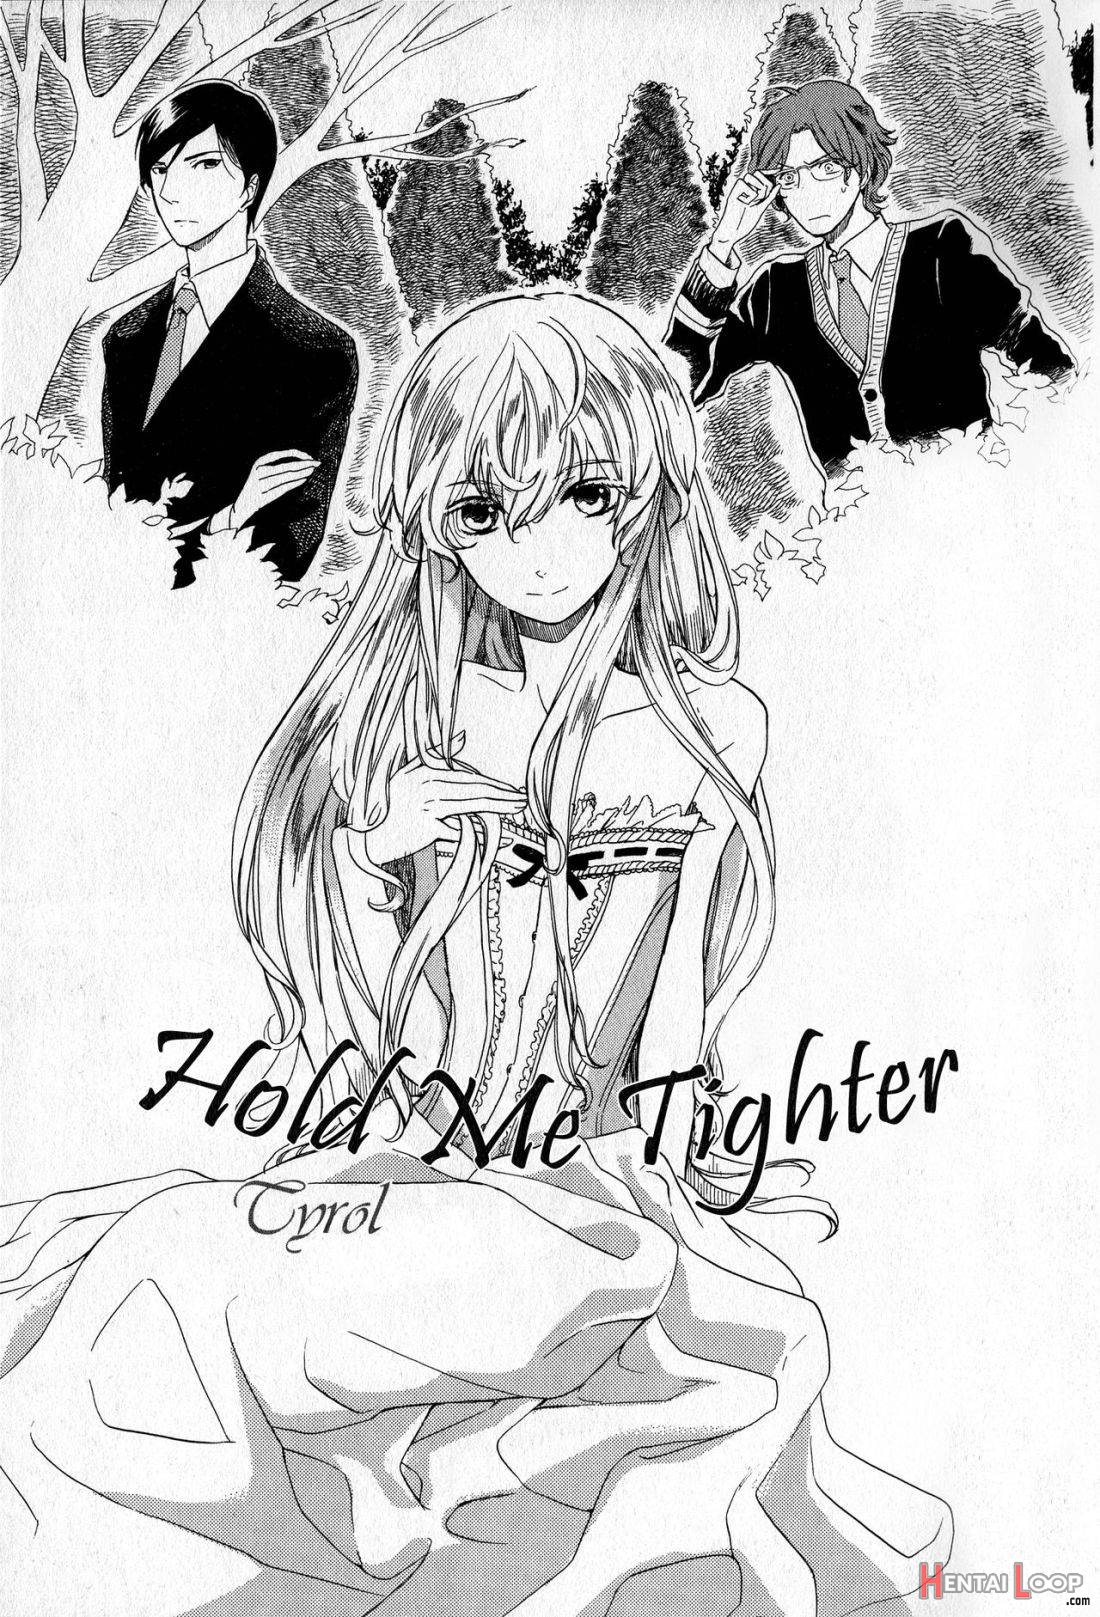 Tyrol Hold Me Tighter page 1